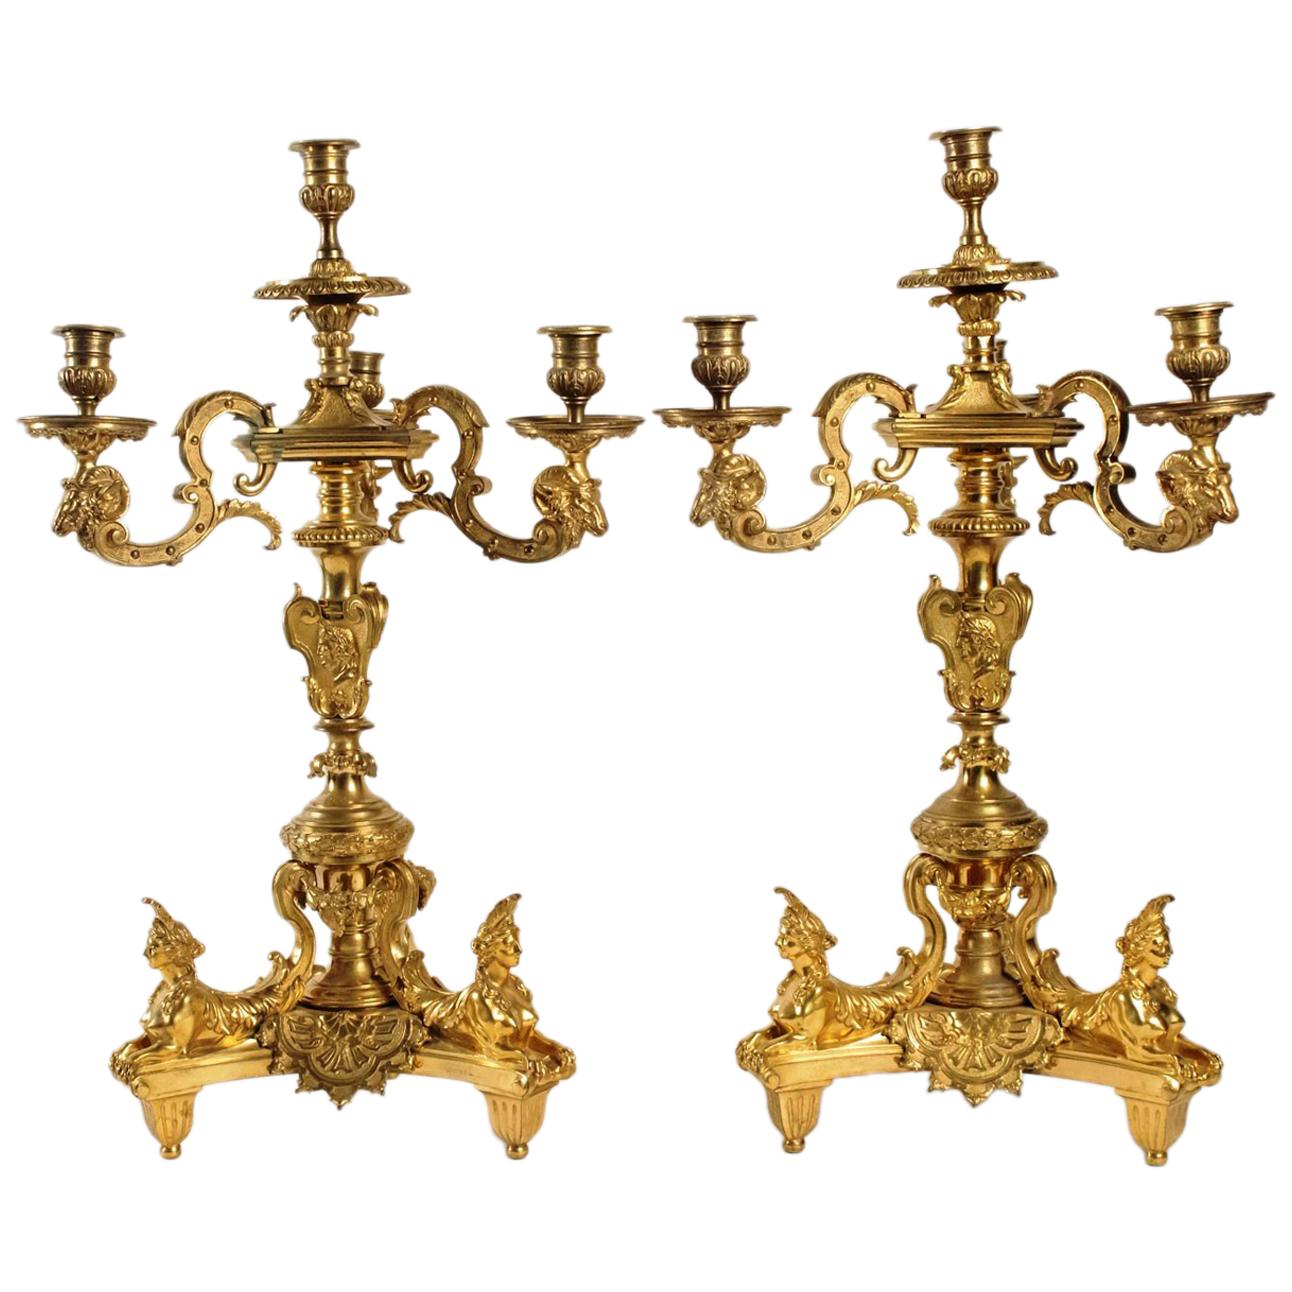 Rare Pair of Gilt Bronze Candelabras, after A-C Boulle France, Late 19th Century